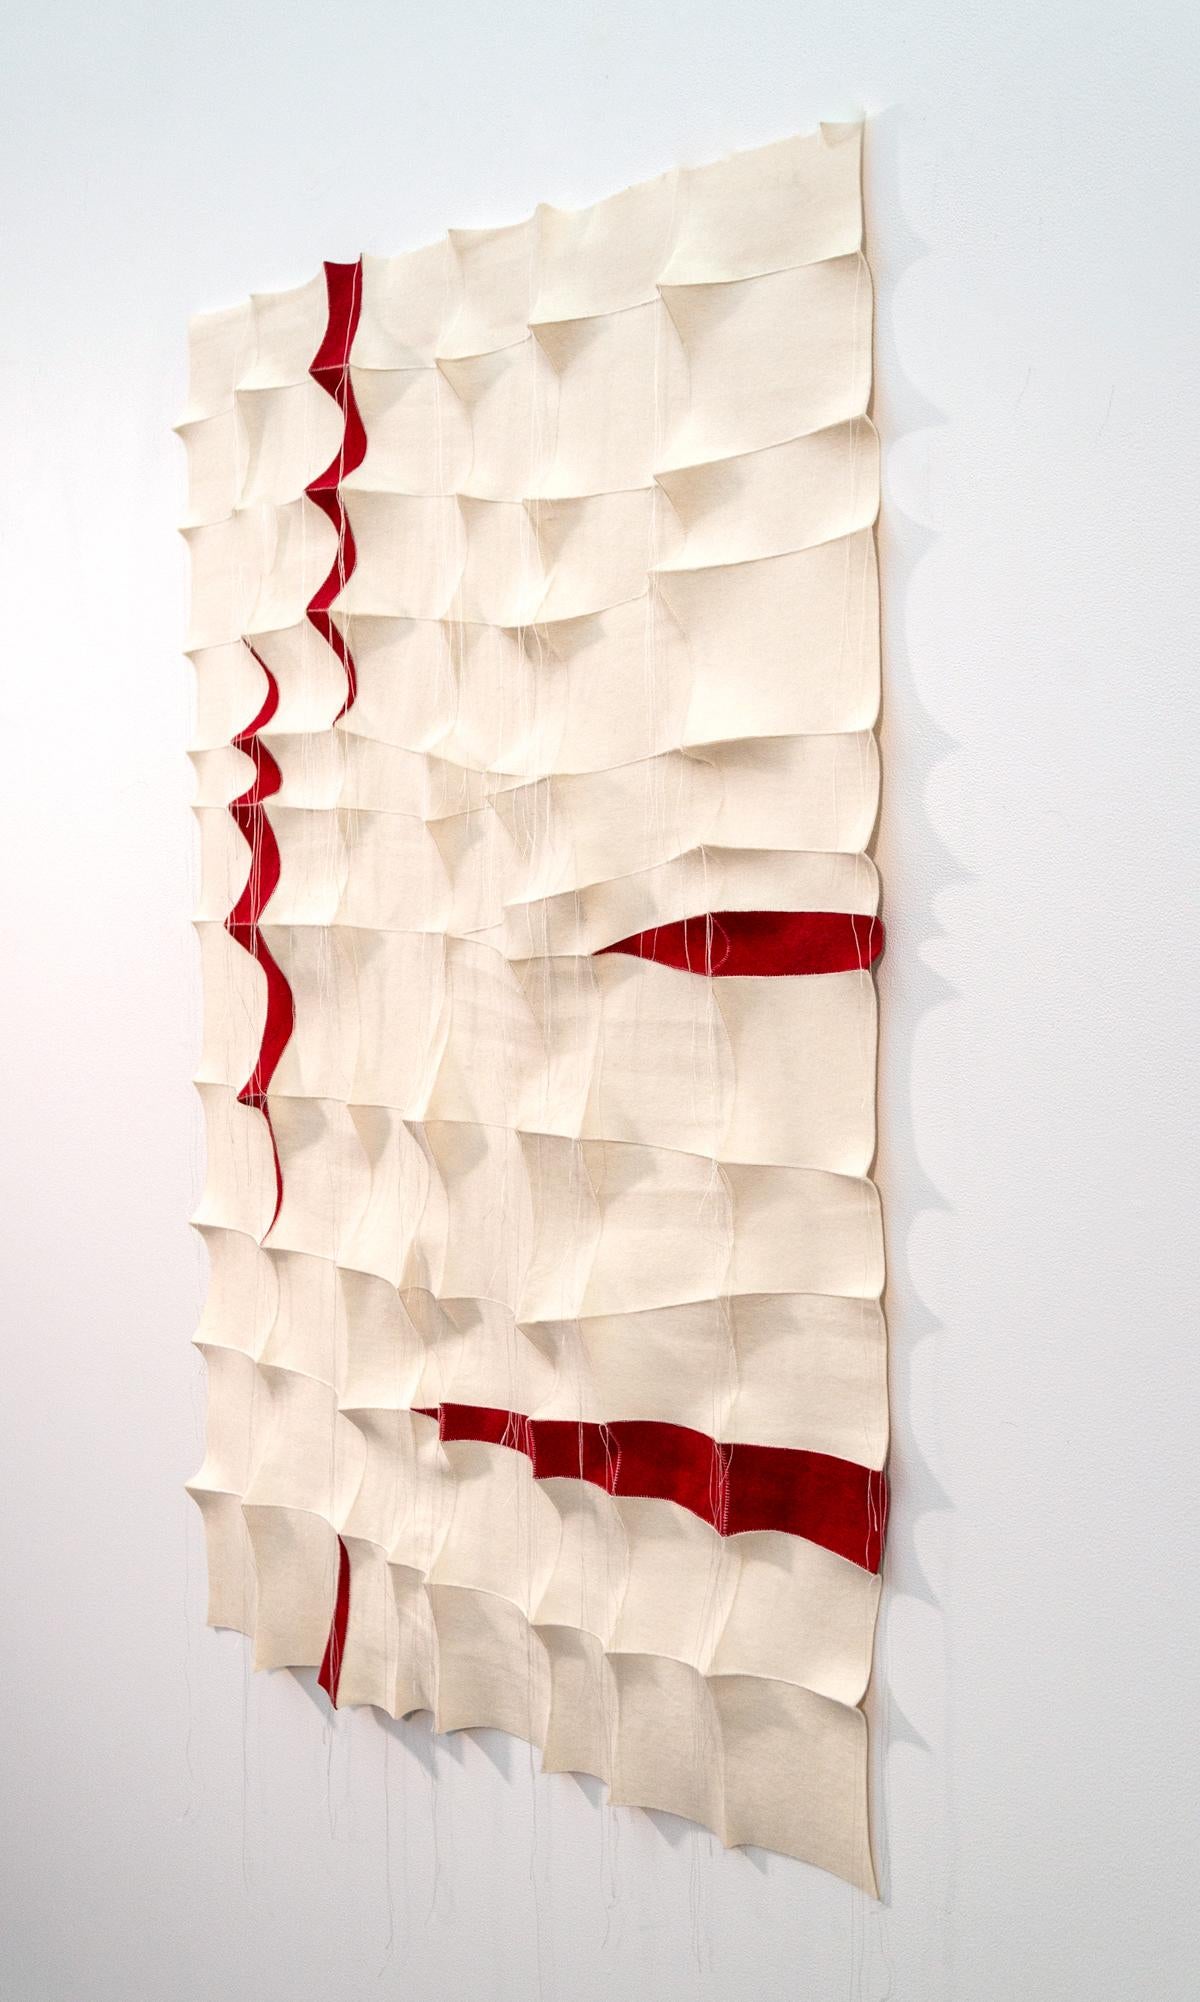 The natural world provides infinite inspiration for the beautifully textured work of Chung-Im Kim. The fabric artist creates unique wall hangings from sewing tiny pieces of industrial felt together, pulled taut to add tension in the design and a 3D